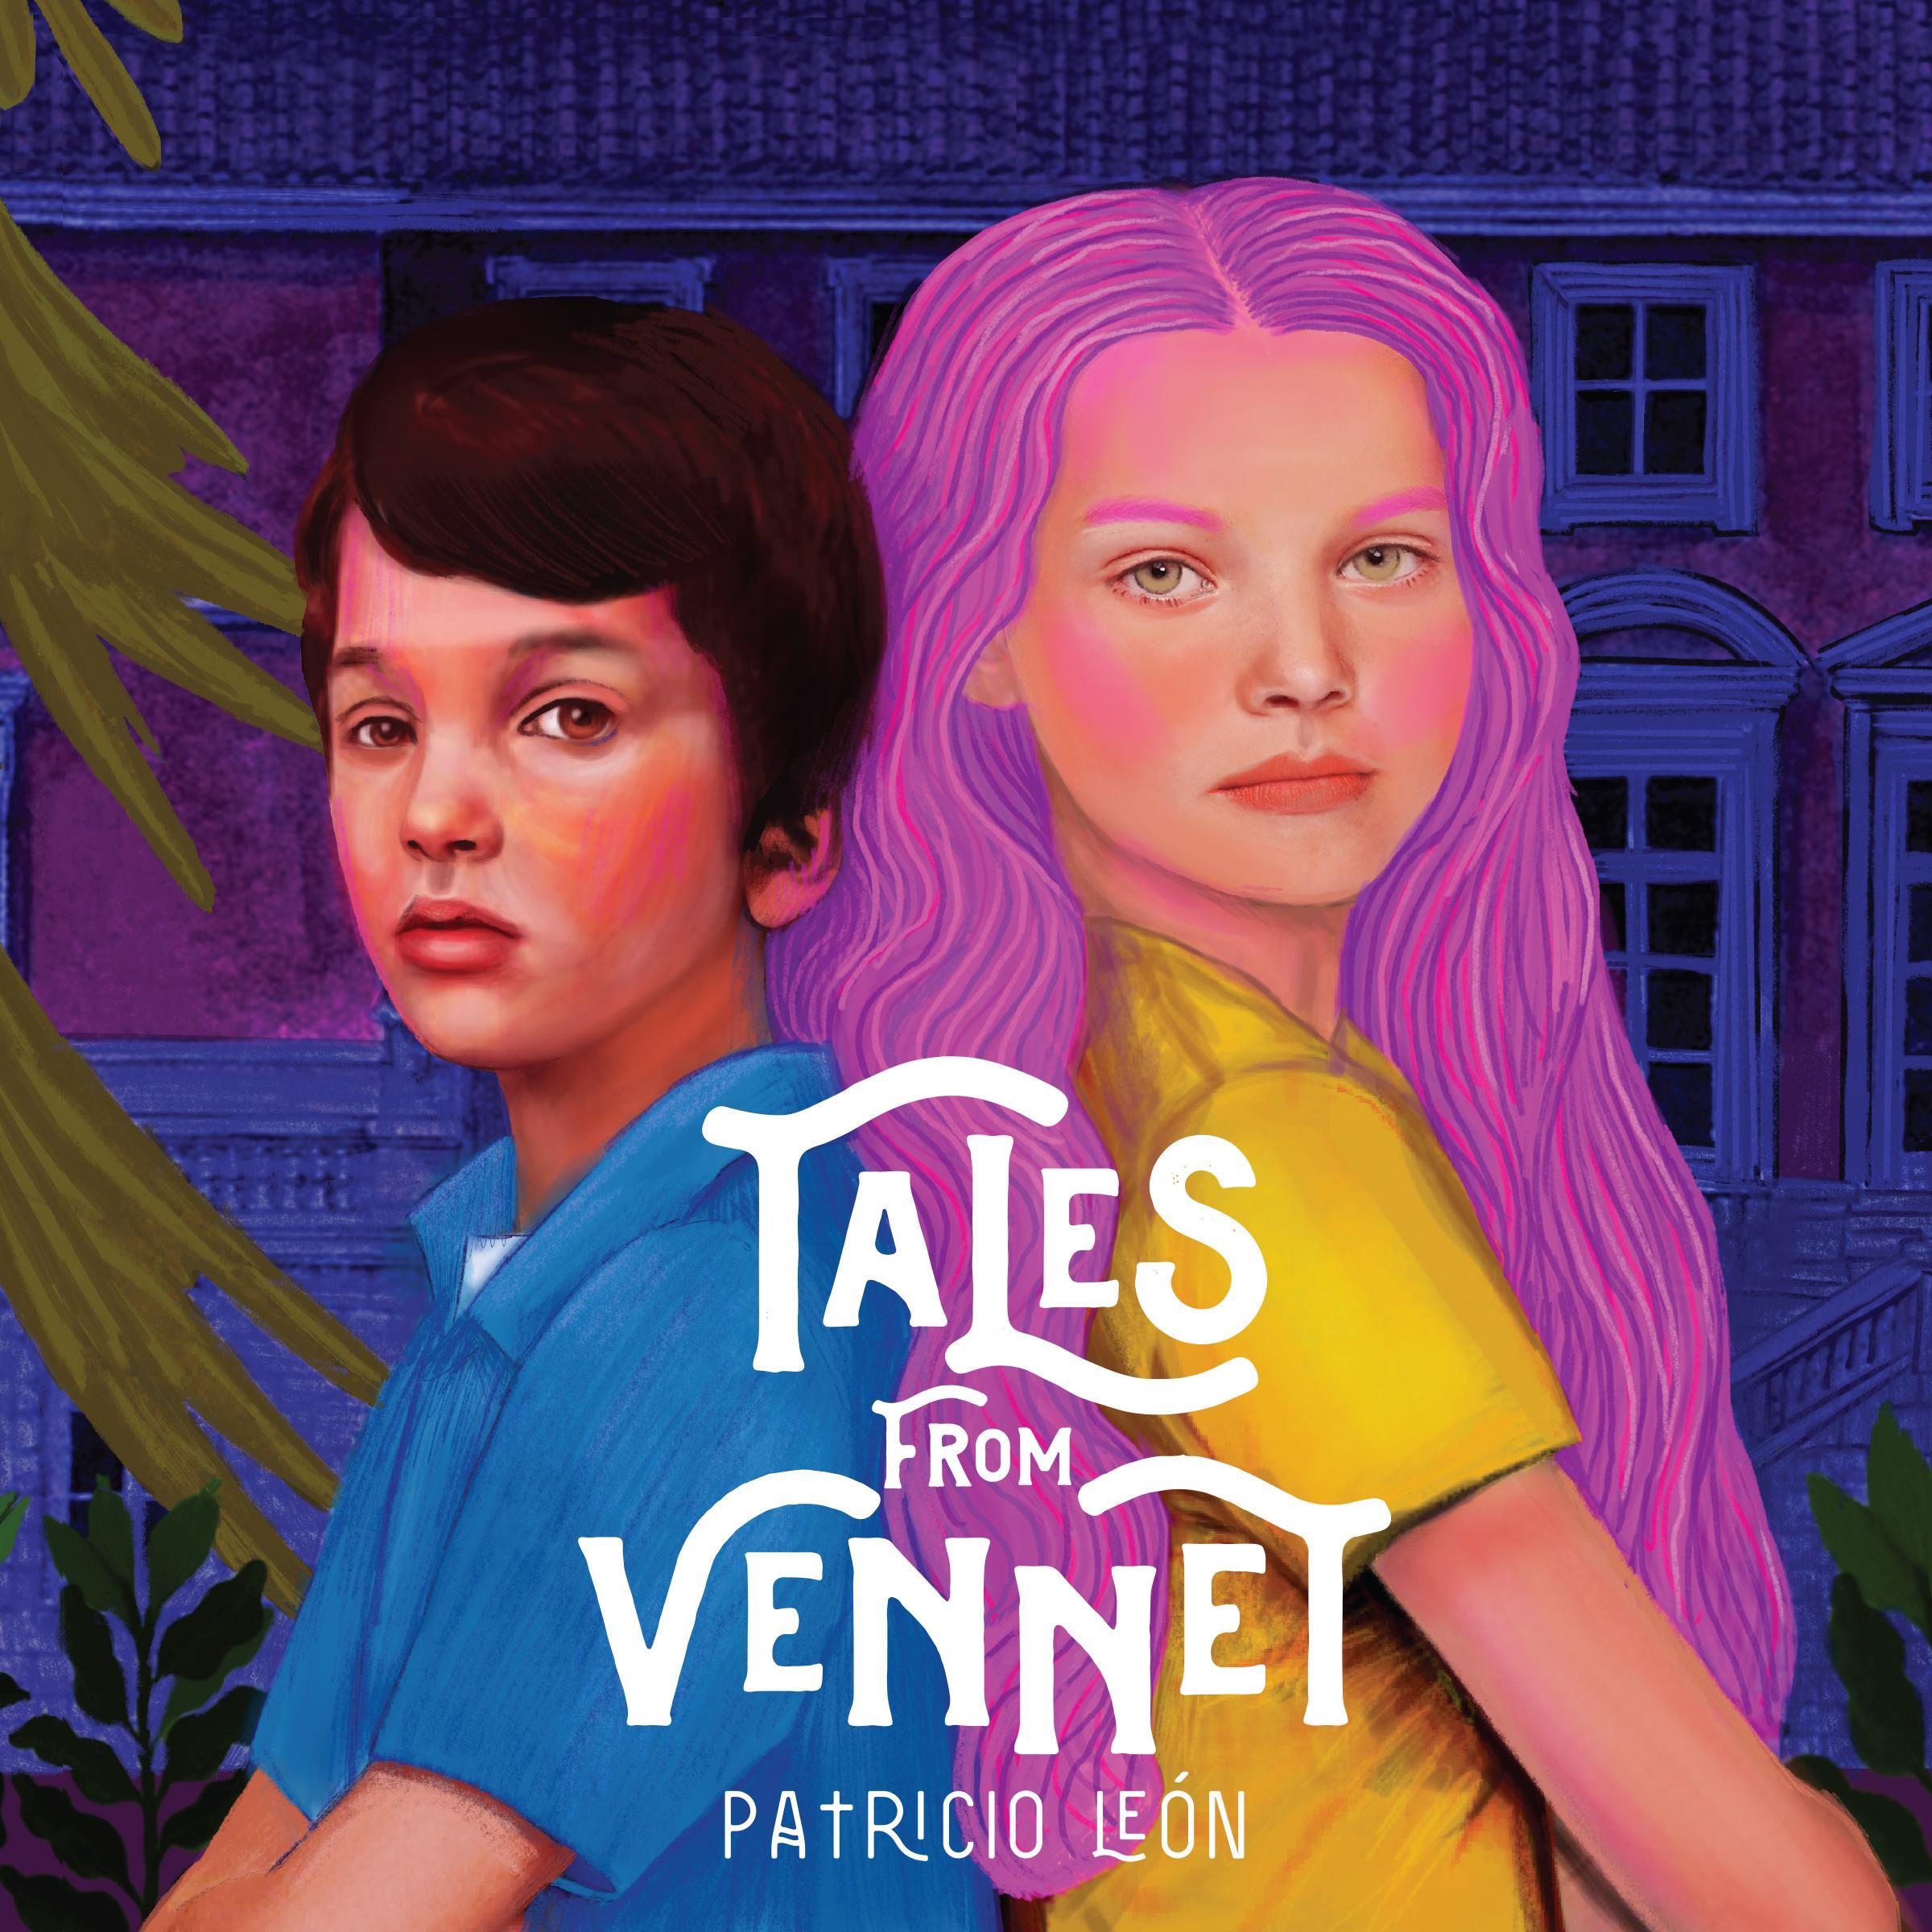 Tales From Vennet